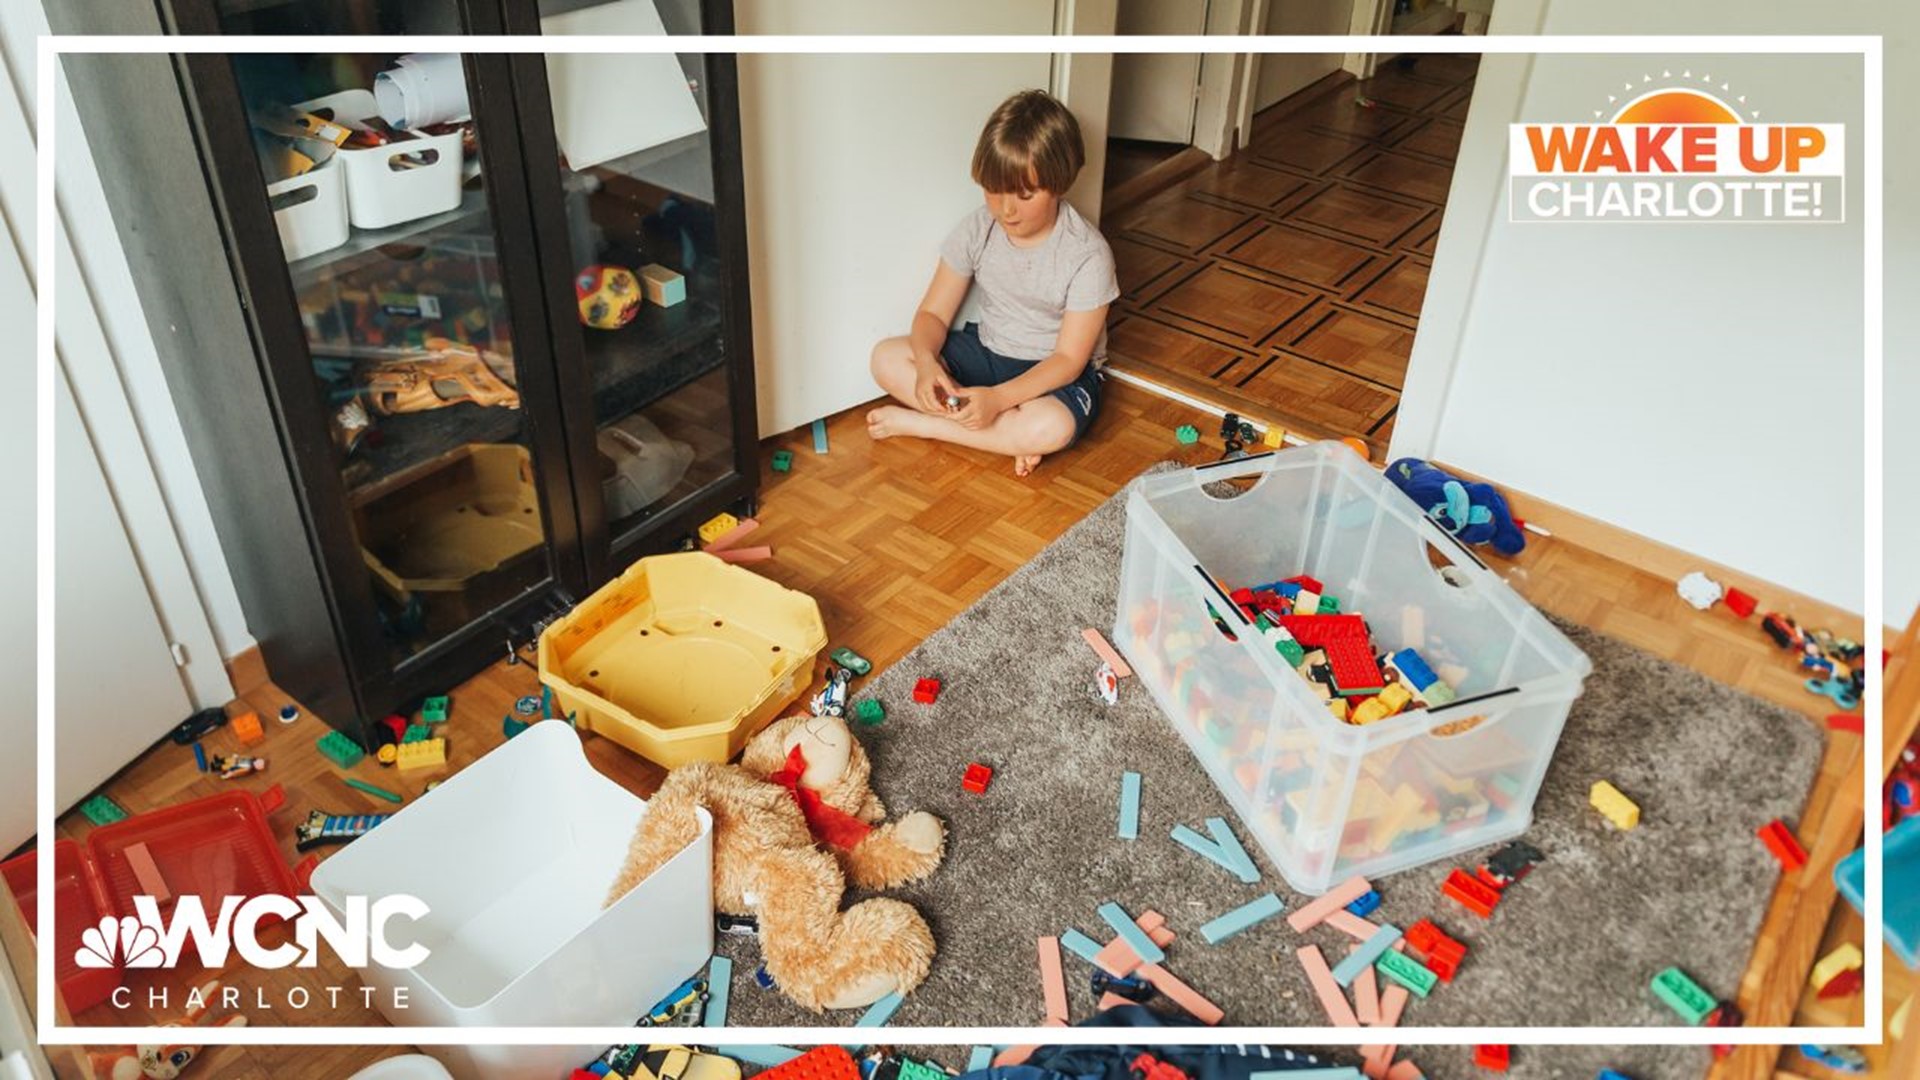 Is your house messy all the time? You're not alone. A new study found that most people only consider their house "really" clean about 11 days a year.